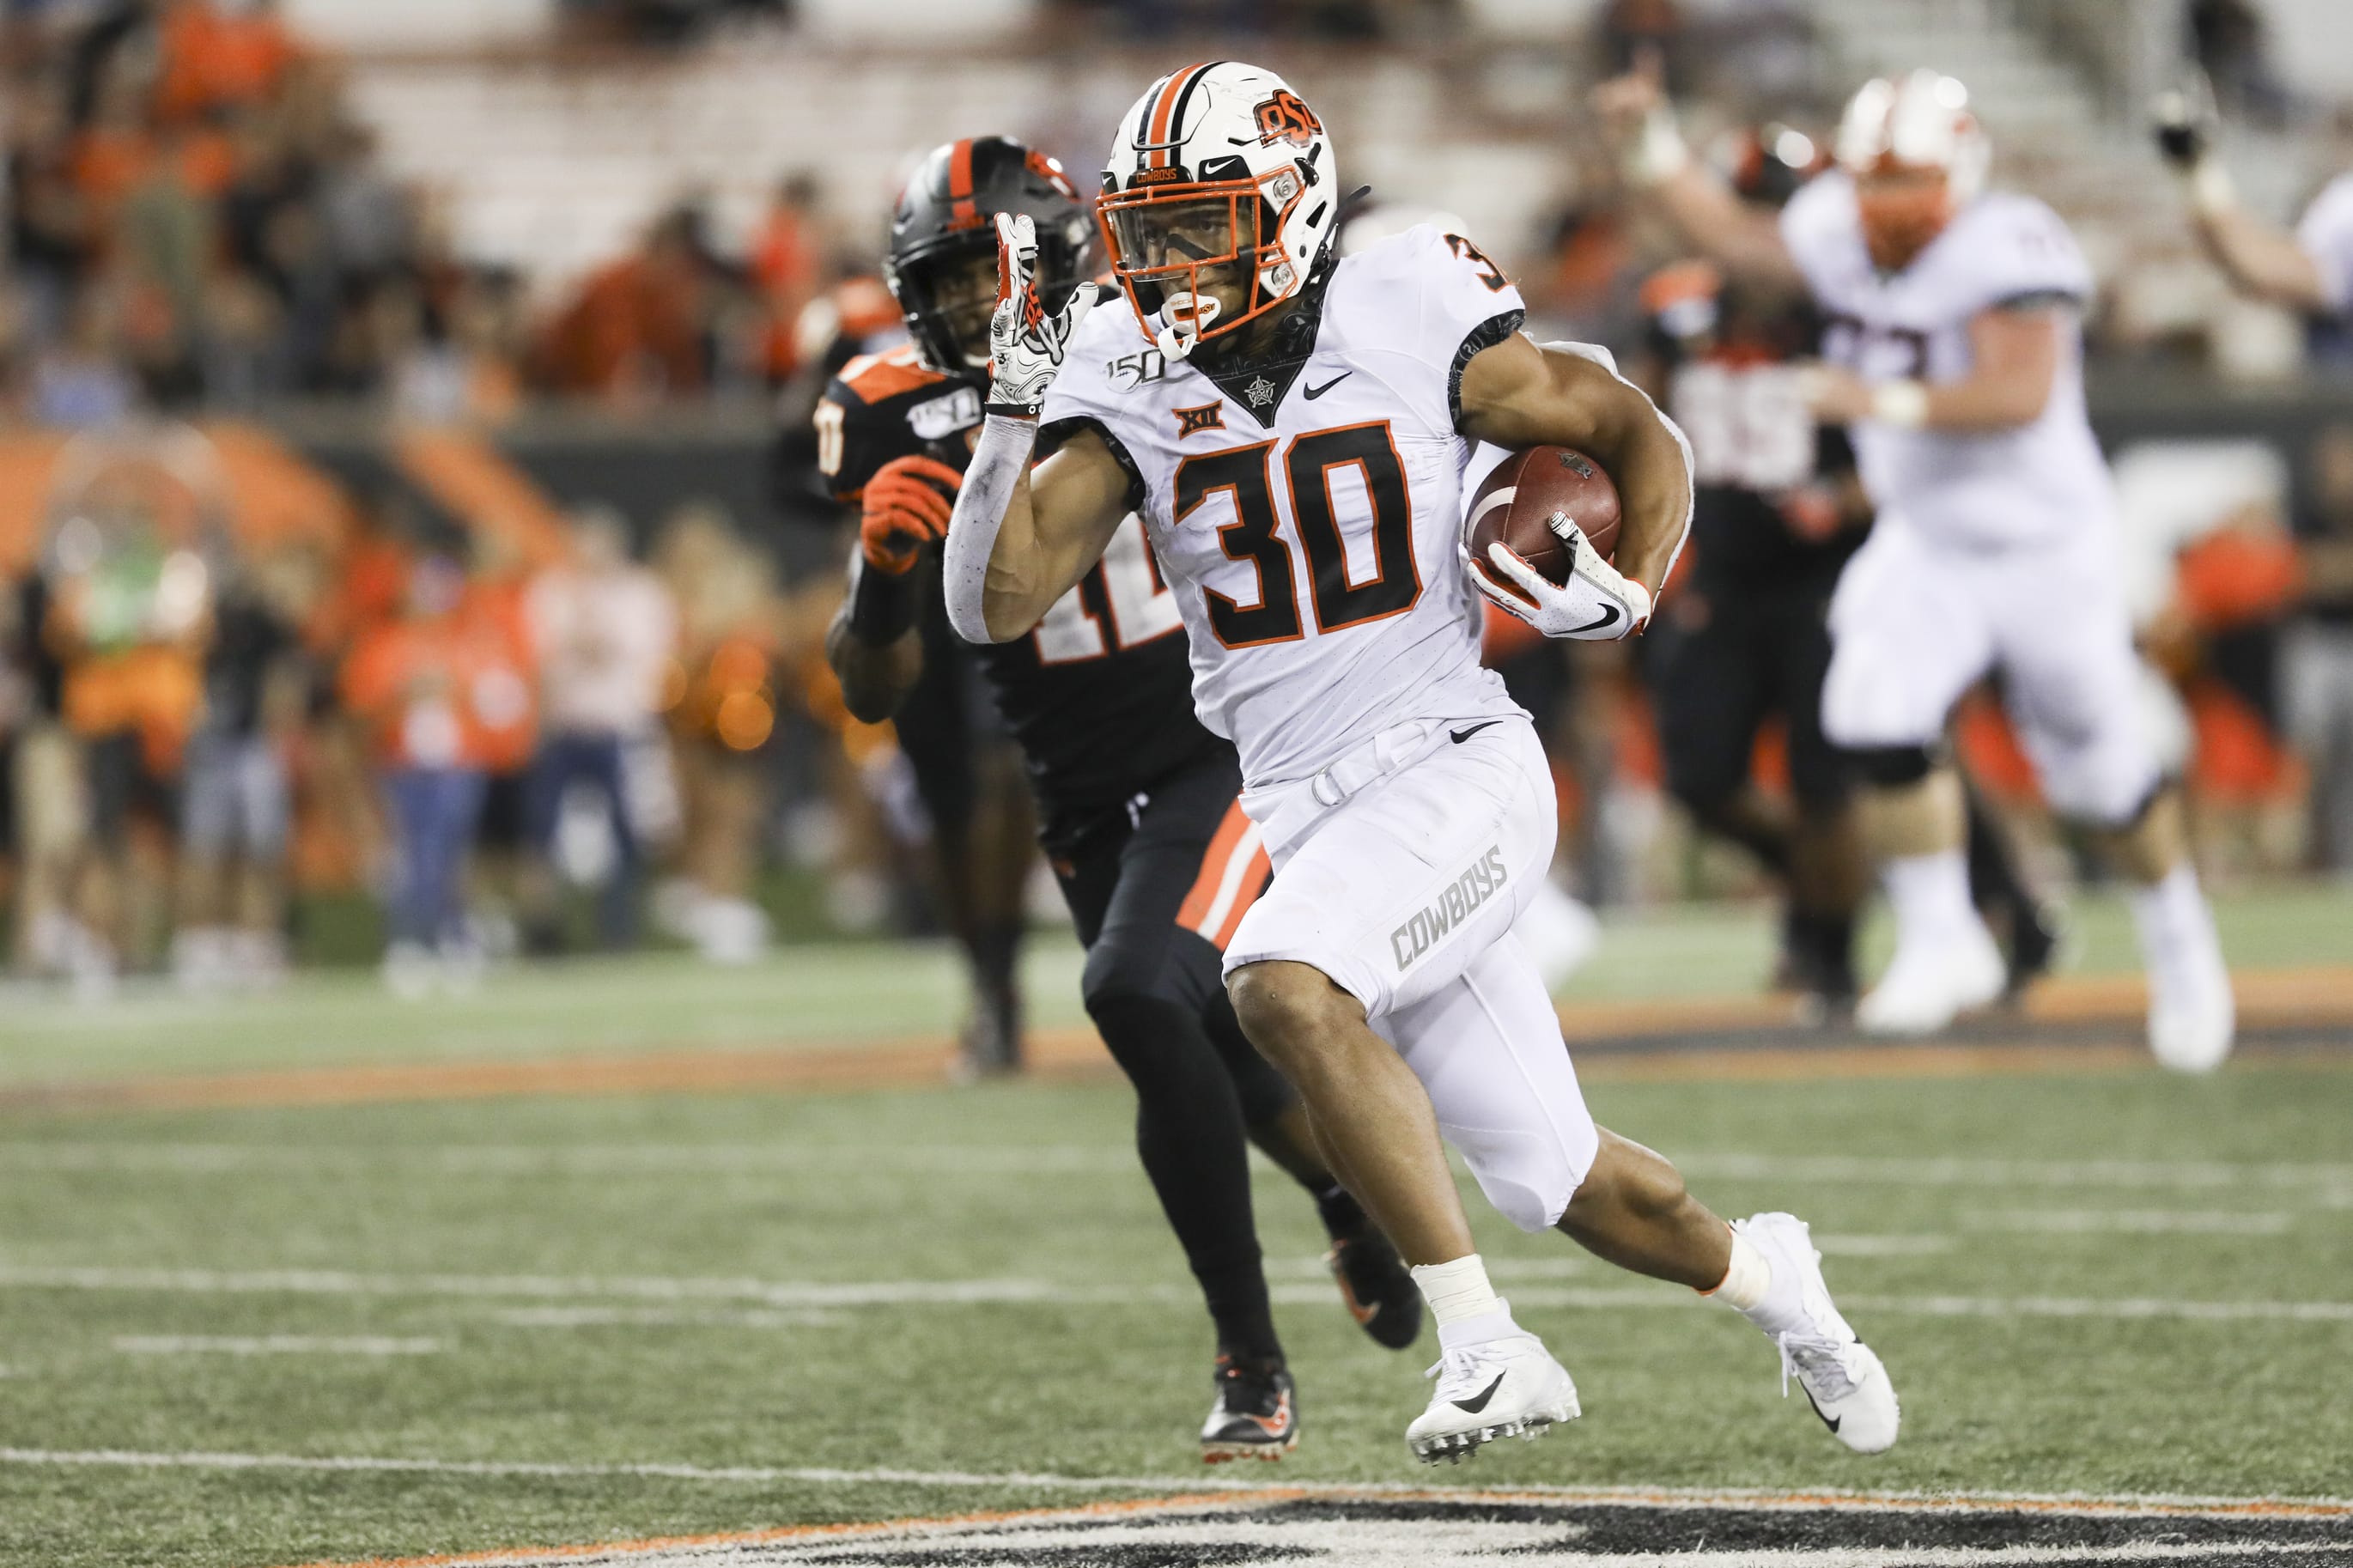 Oklahoma State wide receiver Chuba Hubbard (30) sprints up the field during the second half of an NCAA college football game with Oregon State in Corvallis, Ore., Friday, Aug. 30, 2019. Oklahoma State won 52-36.